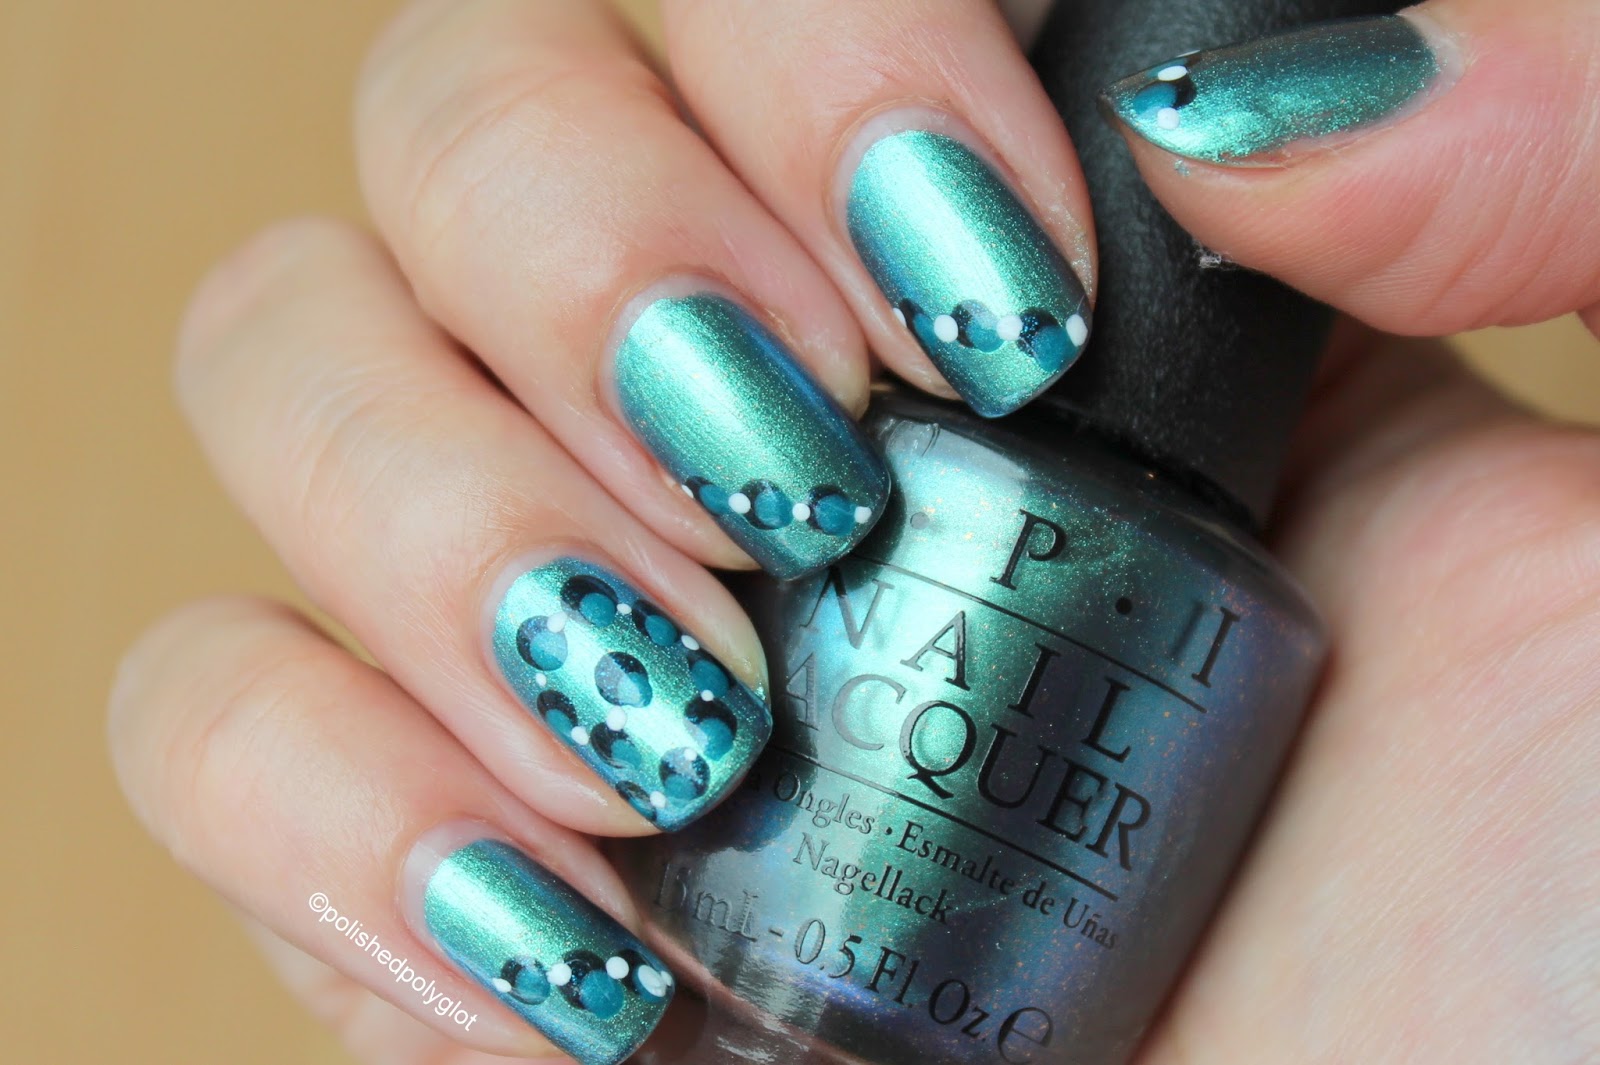 3. 25+ Teal Nail Art Ideas That Will Make You Stand Out - wide 6